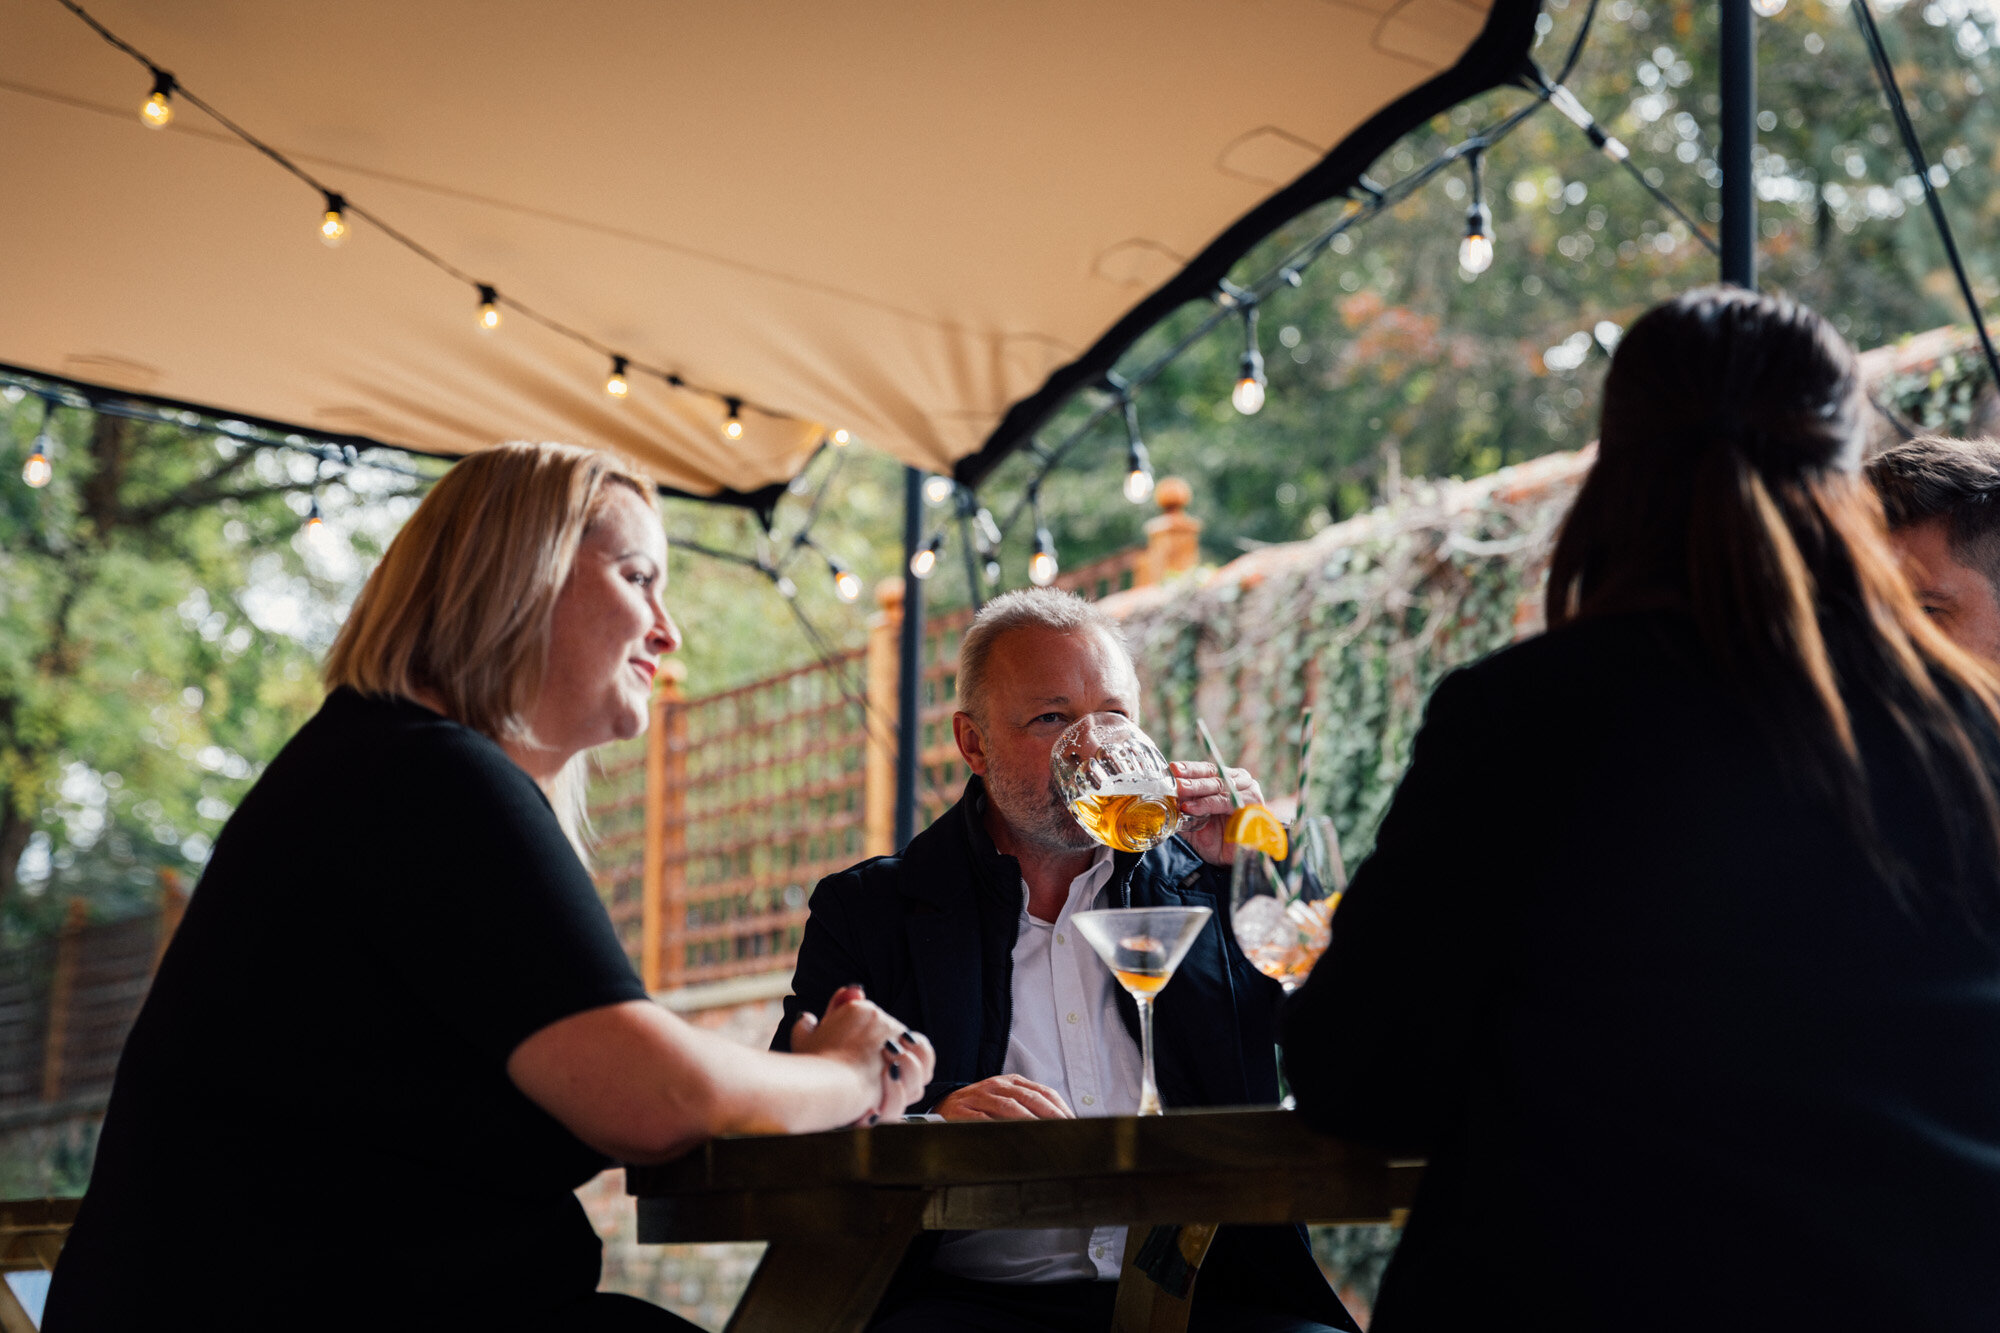 Drinks in the garden at The White Hart pub and restaurant in Ampthill.jpg